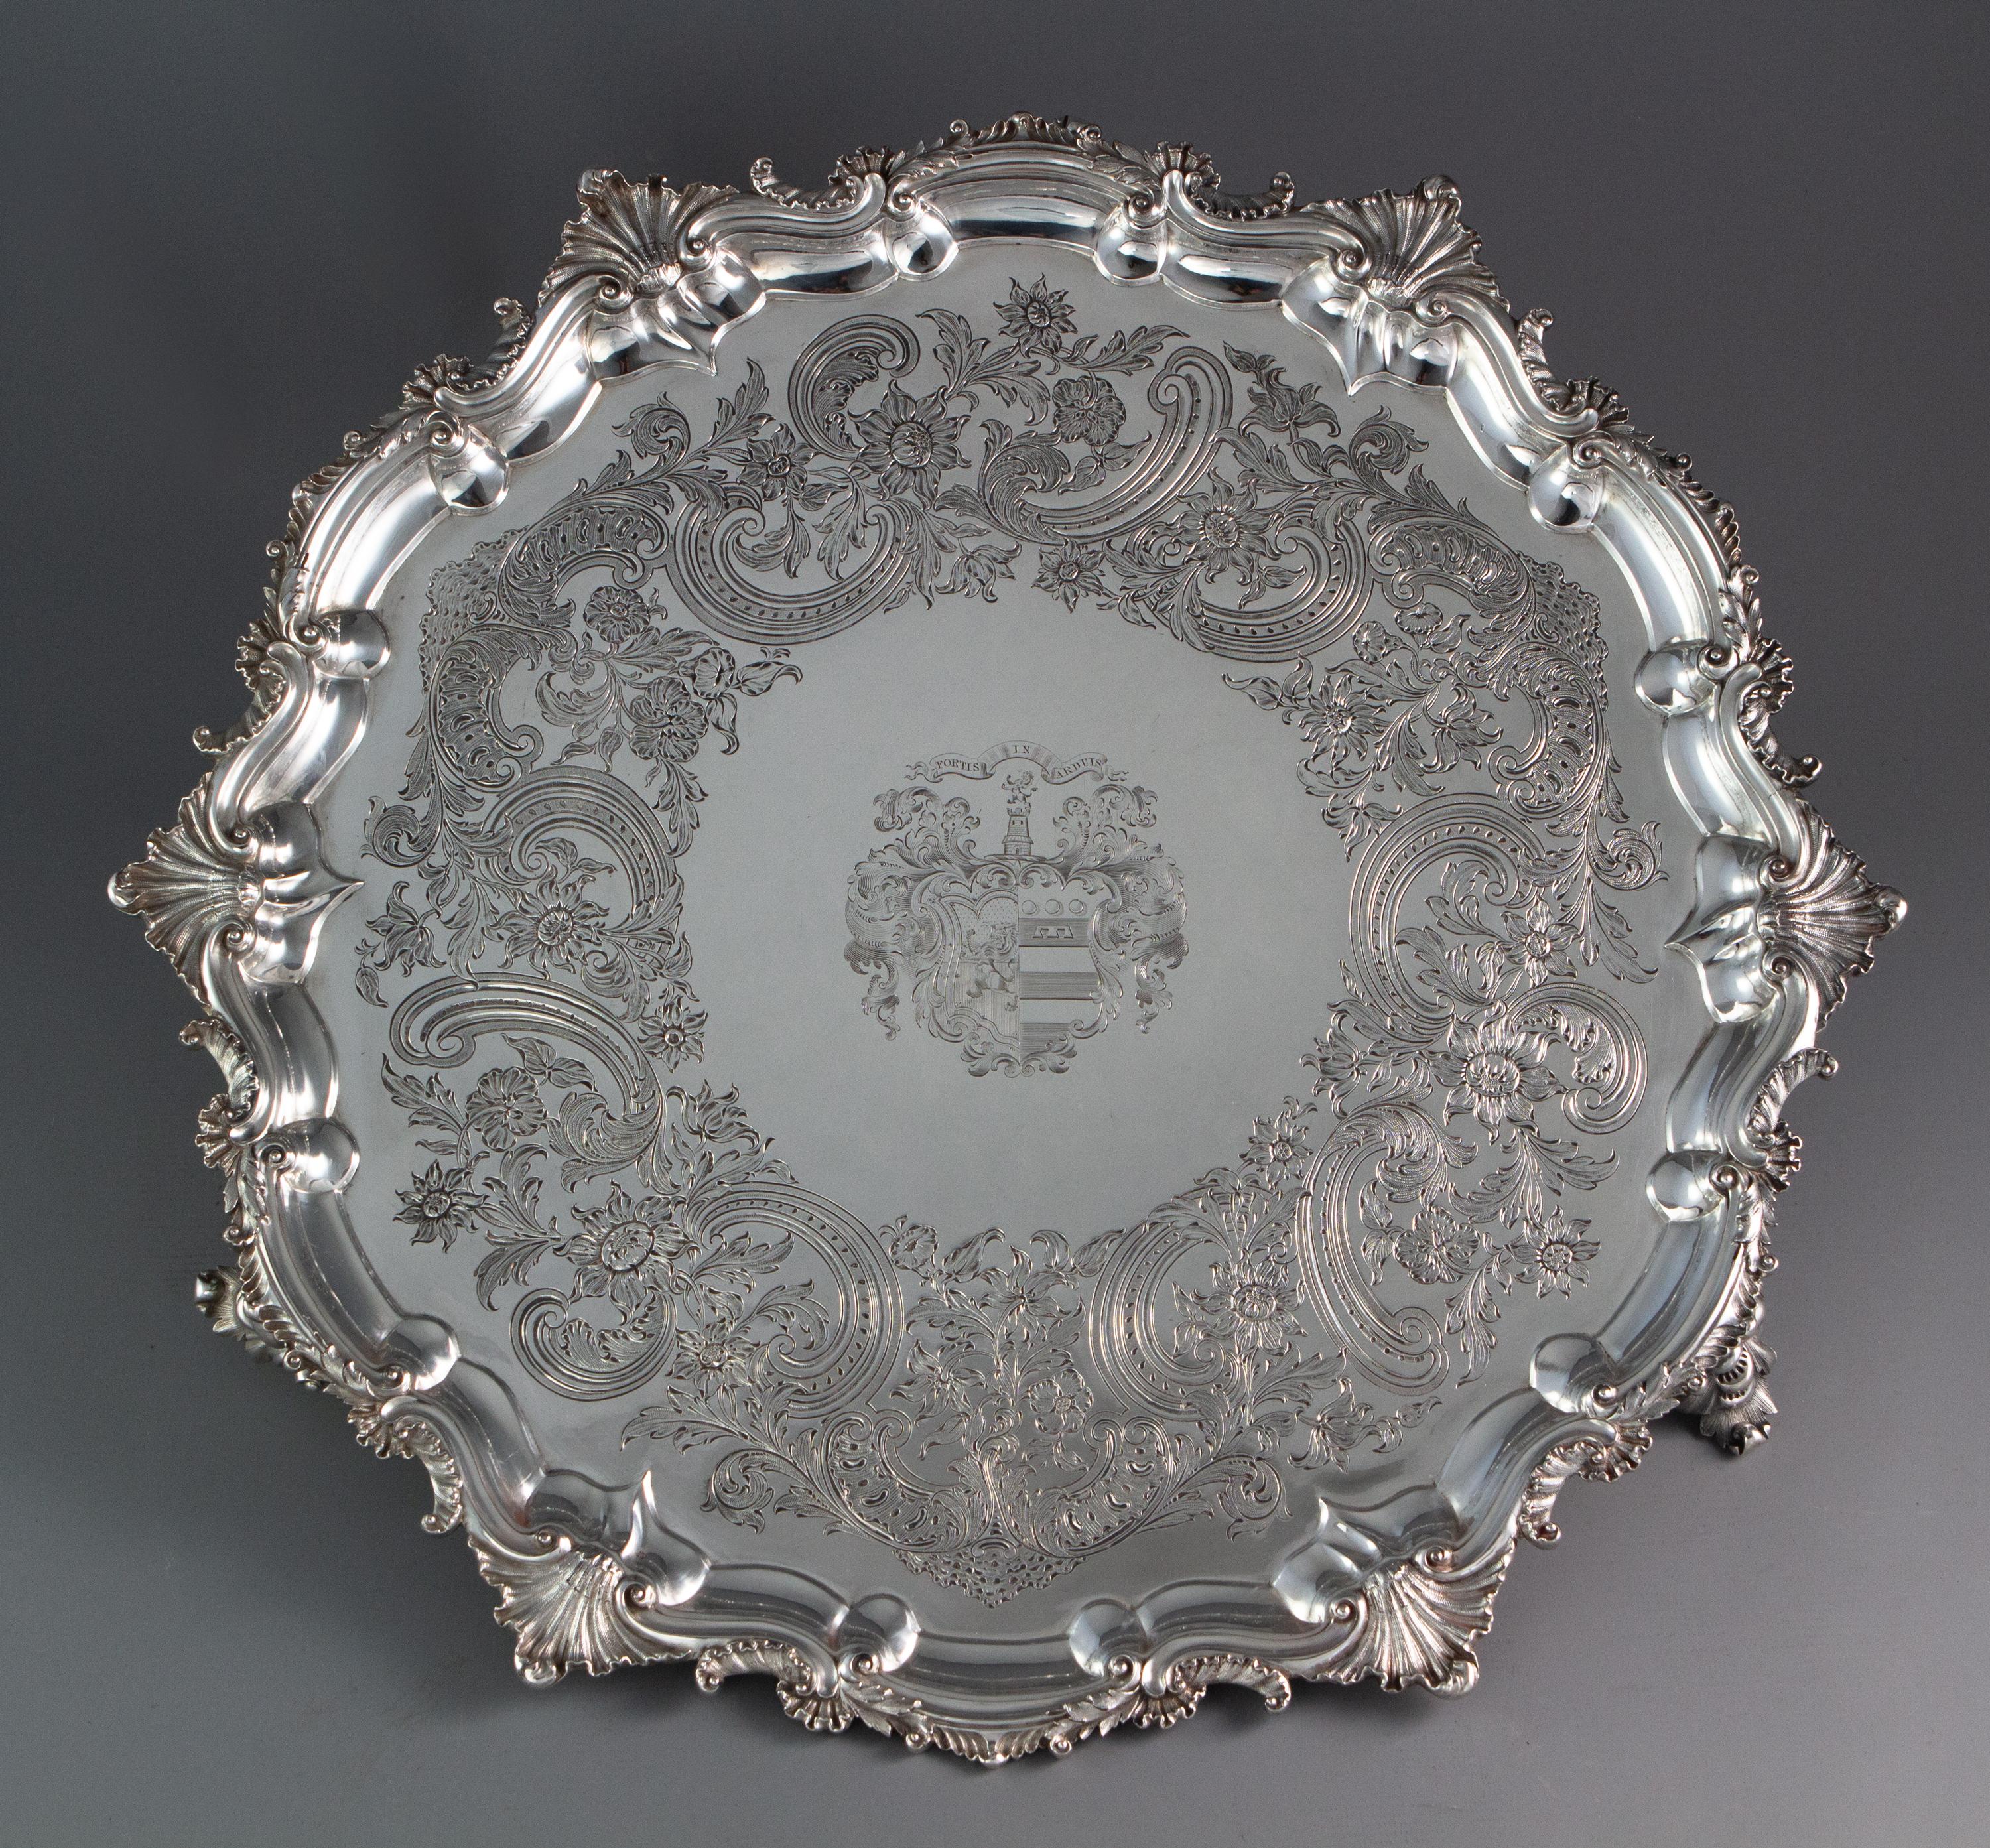 A very large and impressive Georgian silver salver by Paul Storr, London 1829. Of circular form with an ornately cast border, decorated with shells and acanthus motifs. Superbly engraved to the plate with a floral and foliate design, all standing on